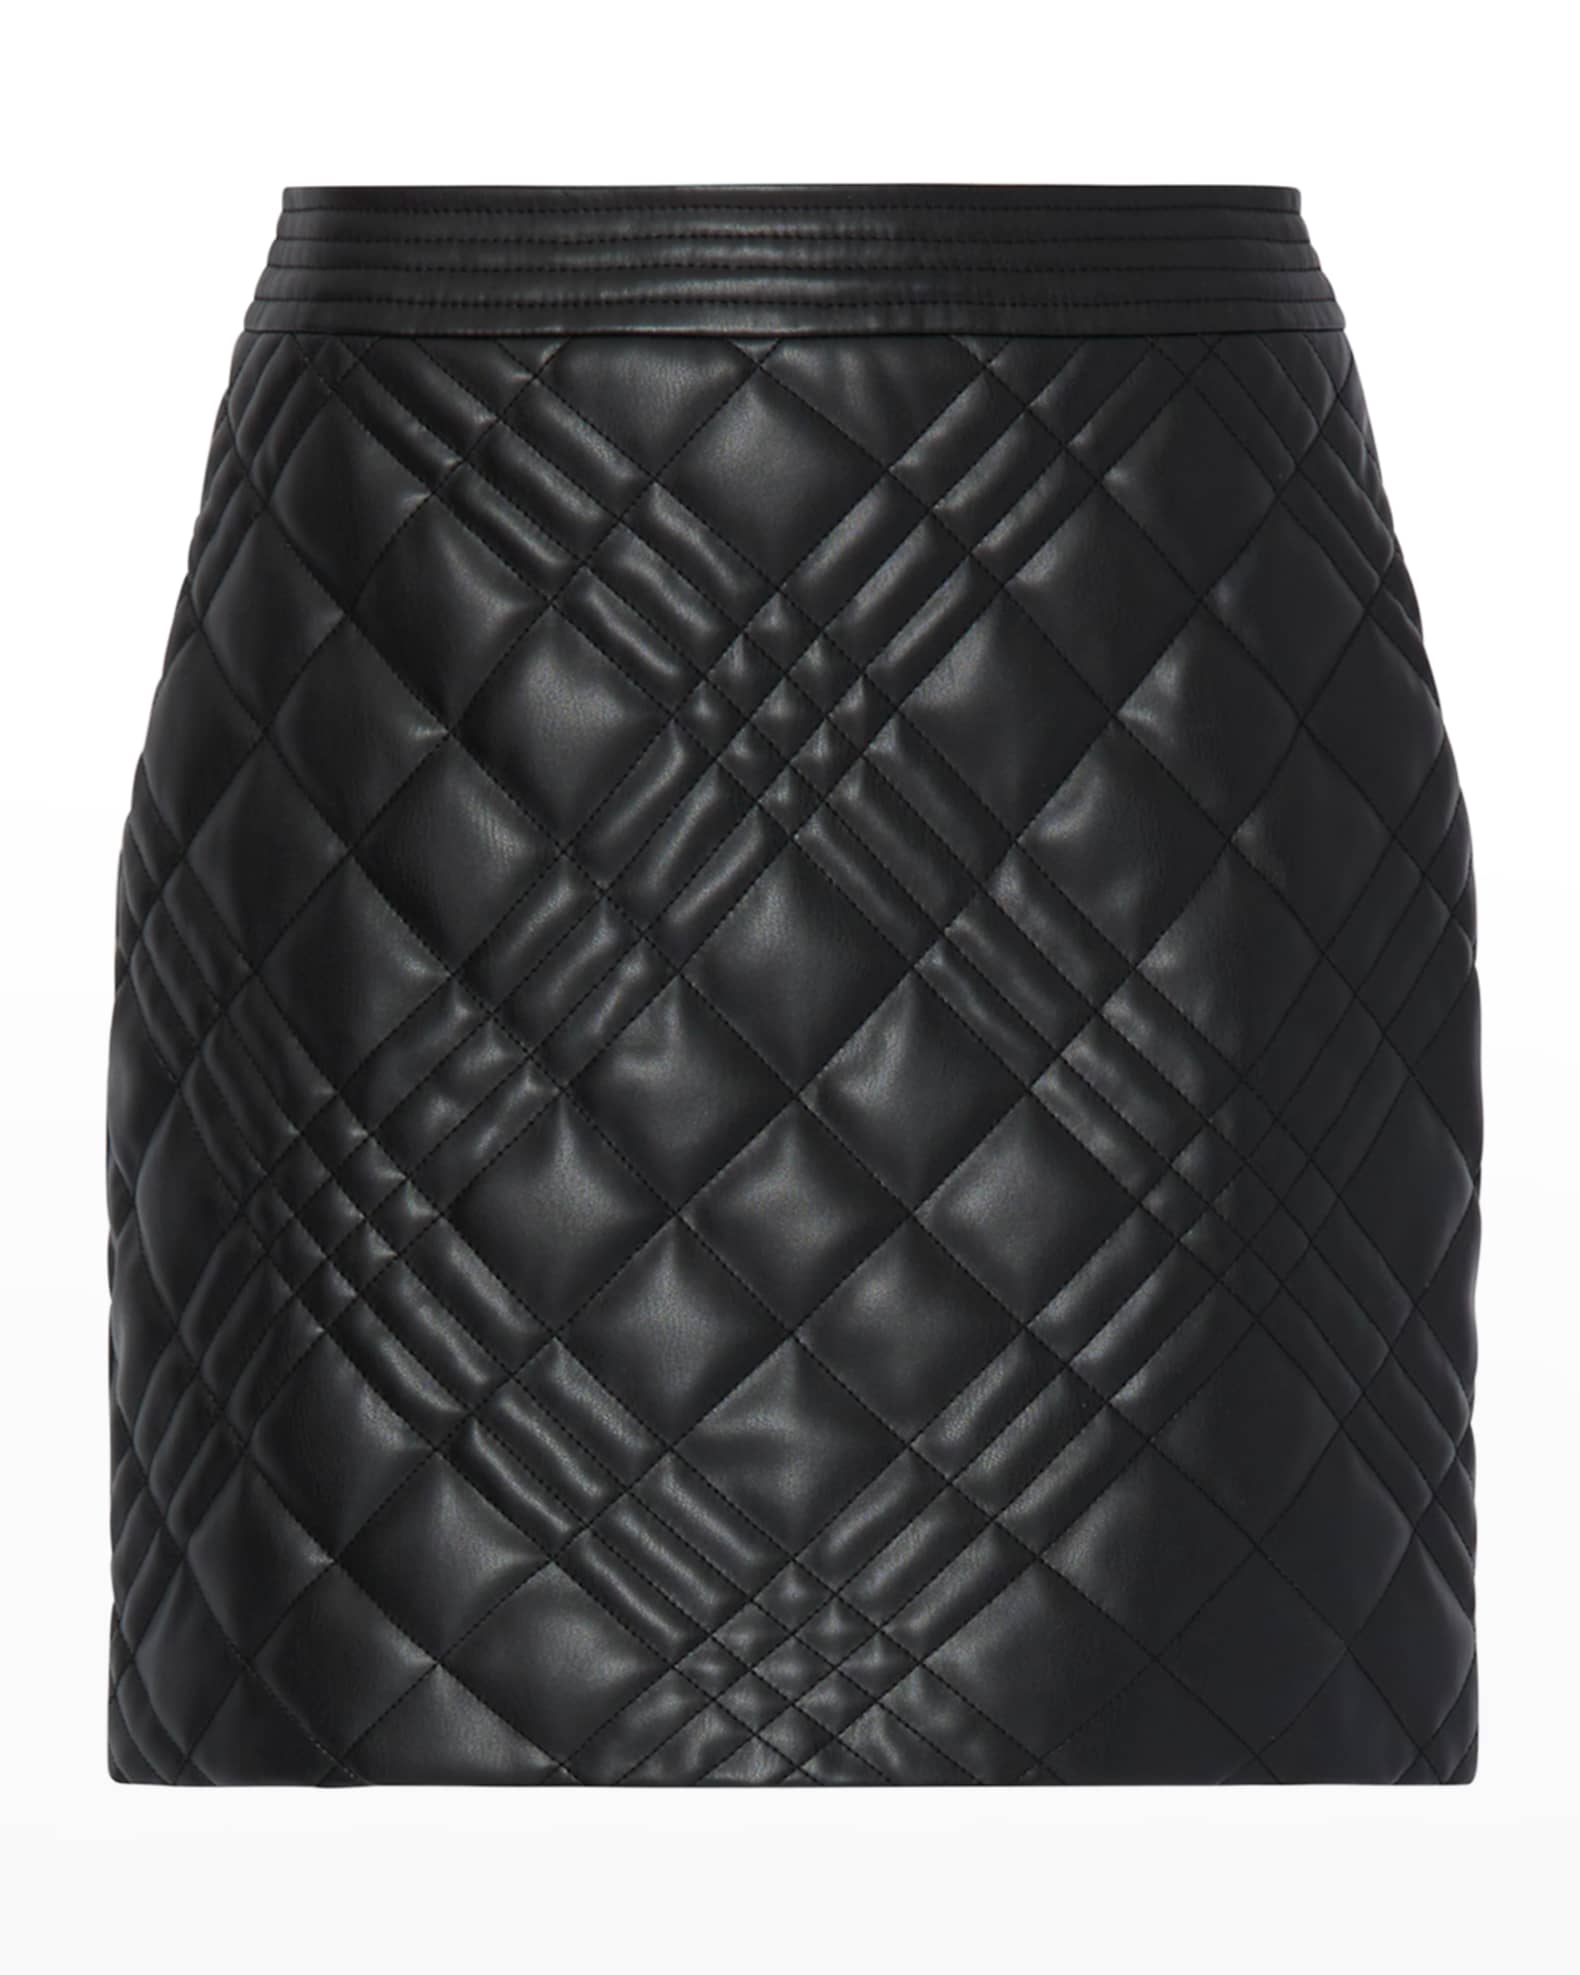 Milly Hailey Quilted Vegan Leather Skirt | Neiman Marcus